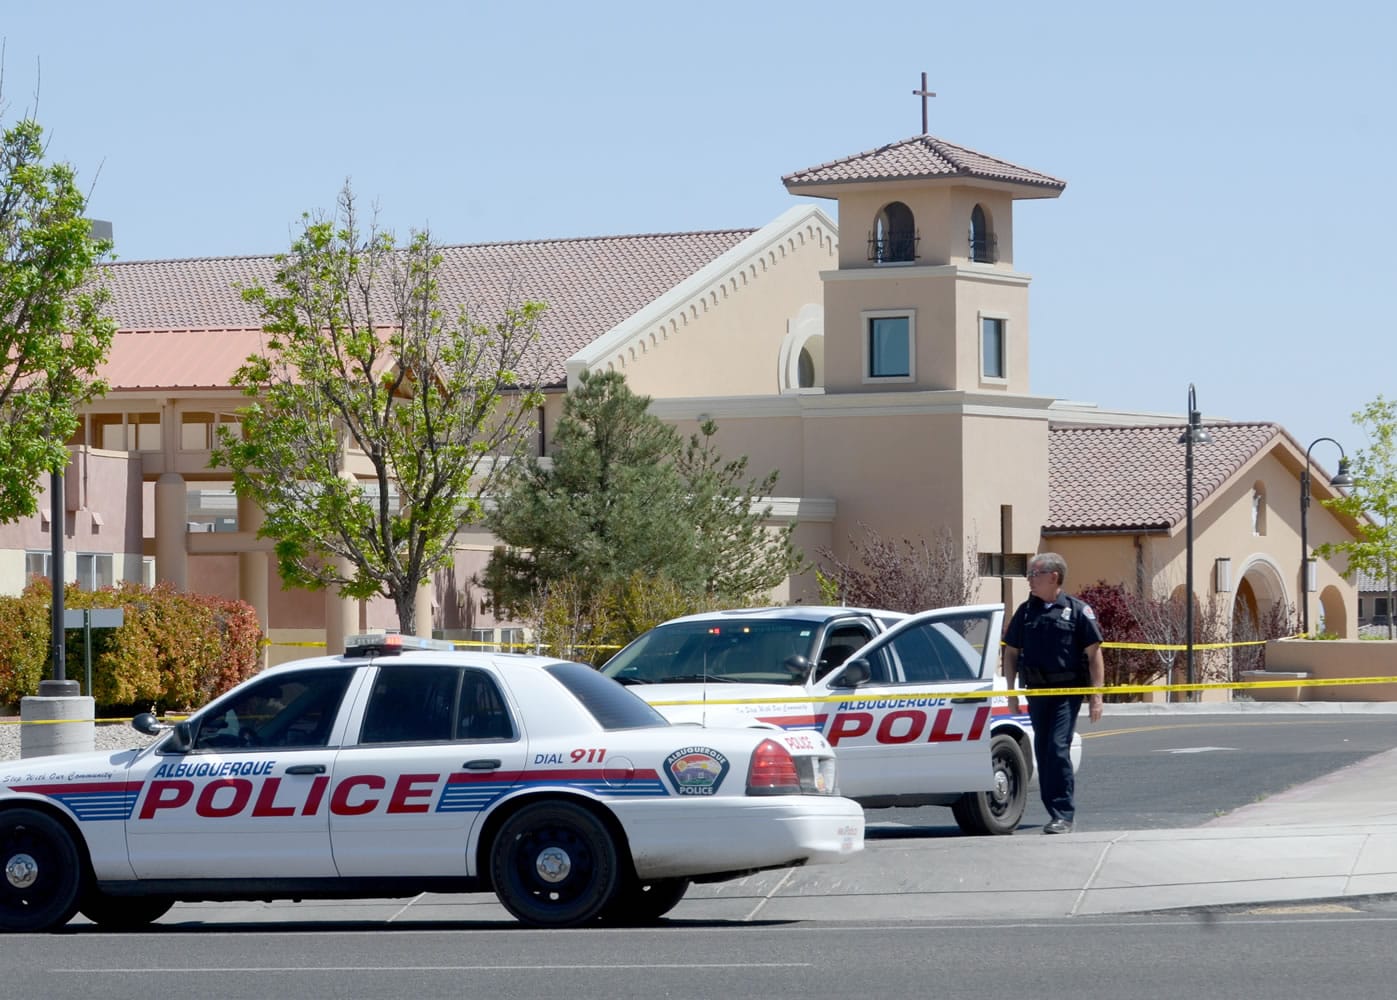 An Albuquerque Police officer walks behind the tape at St. Jude Thaddeus Catholic Church on Sunday in Albuquerque, N.M., the scene of a multiple stabbing at the conclusion of morning services.